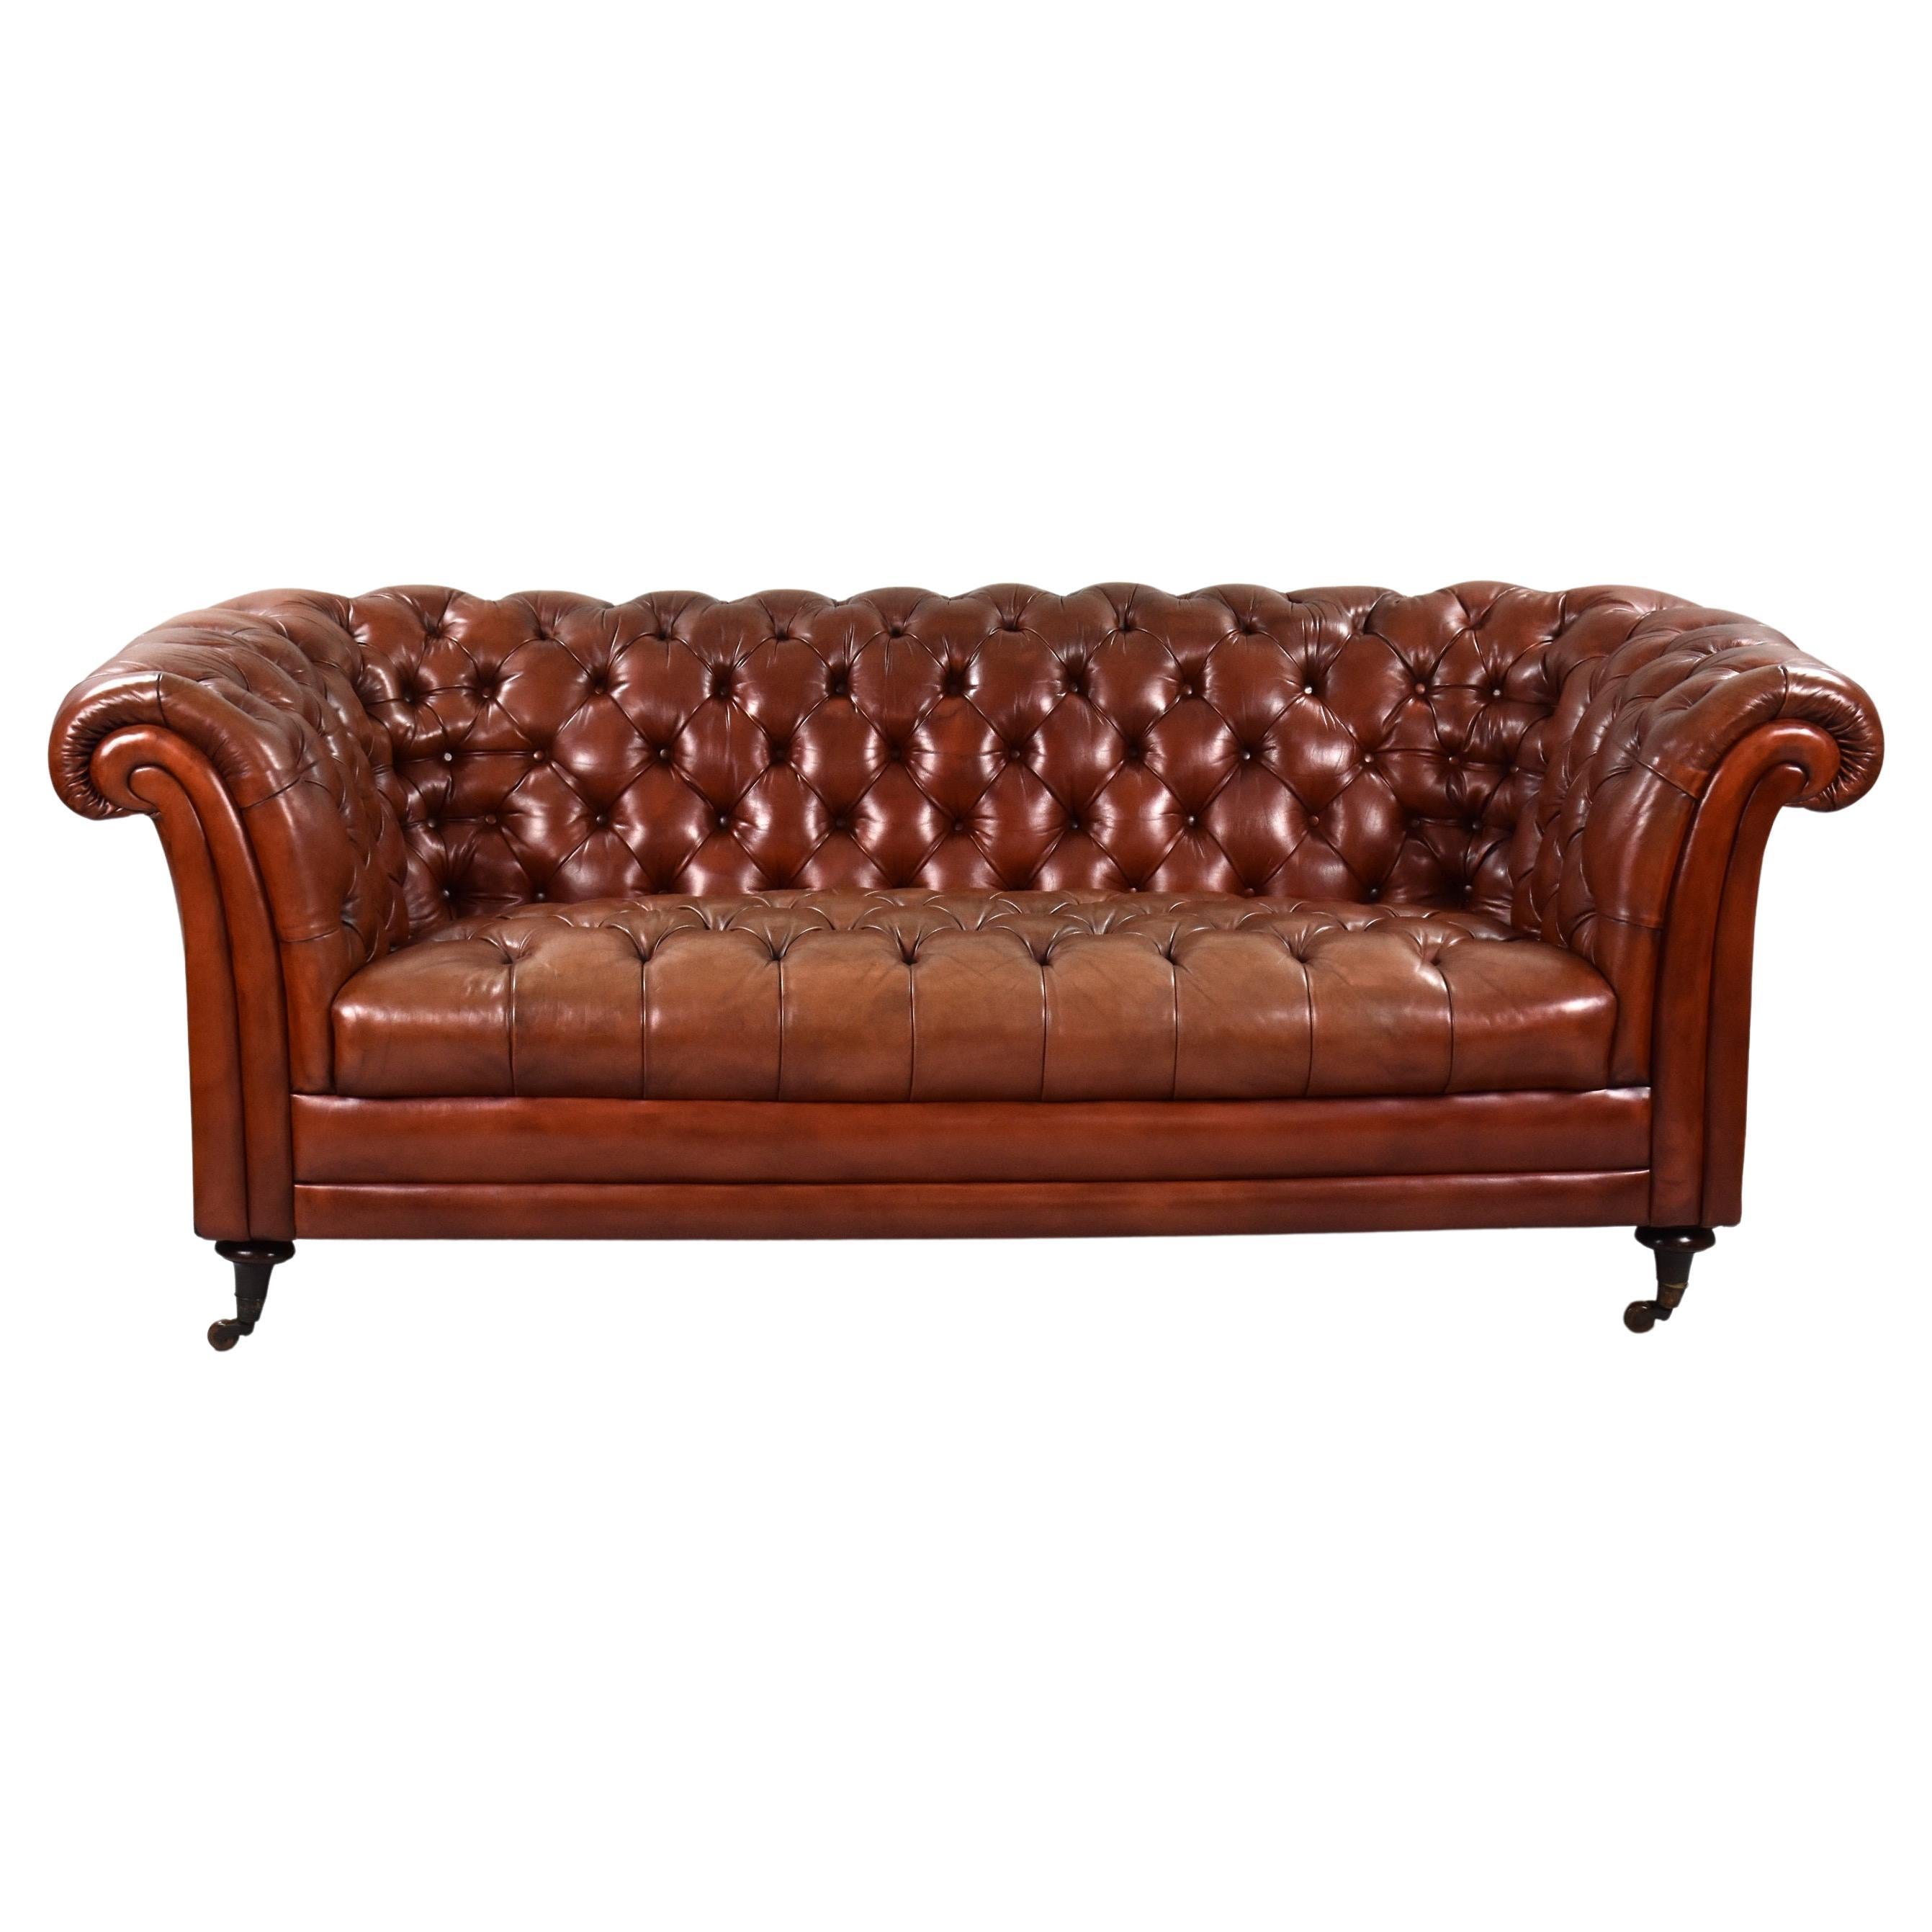 Victorian Style Leather Chesterfield Sofa